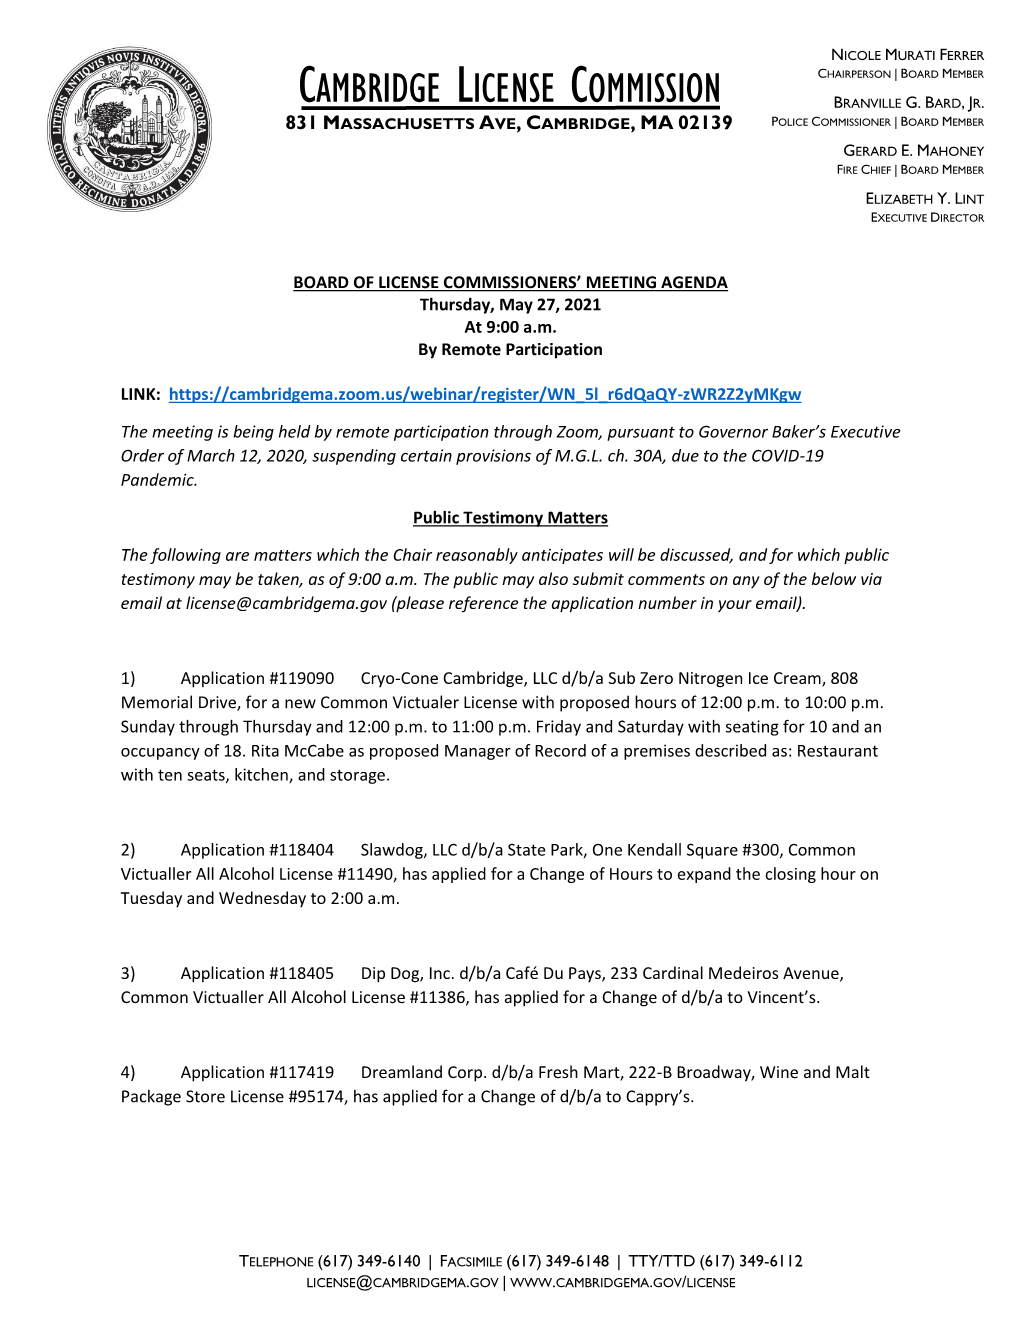 License Commission Meeting Agenda for May 27, 2021